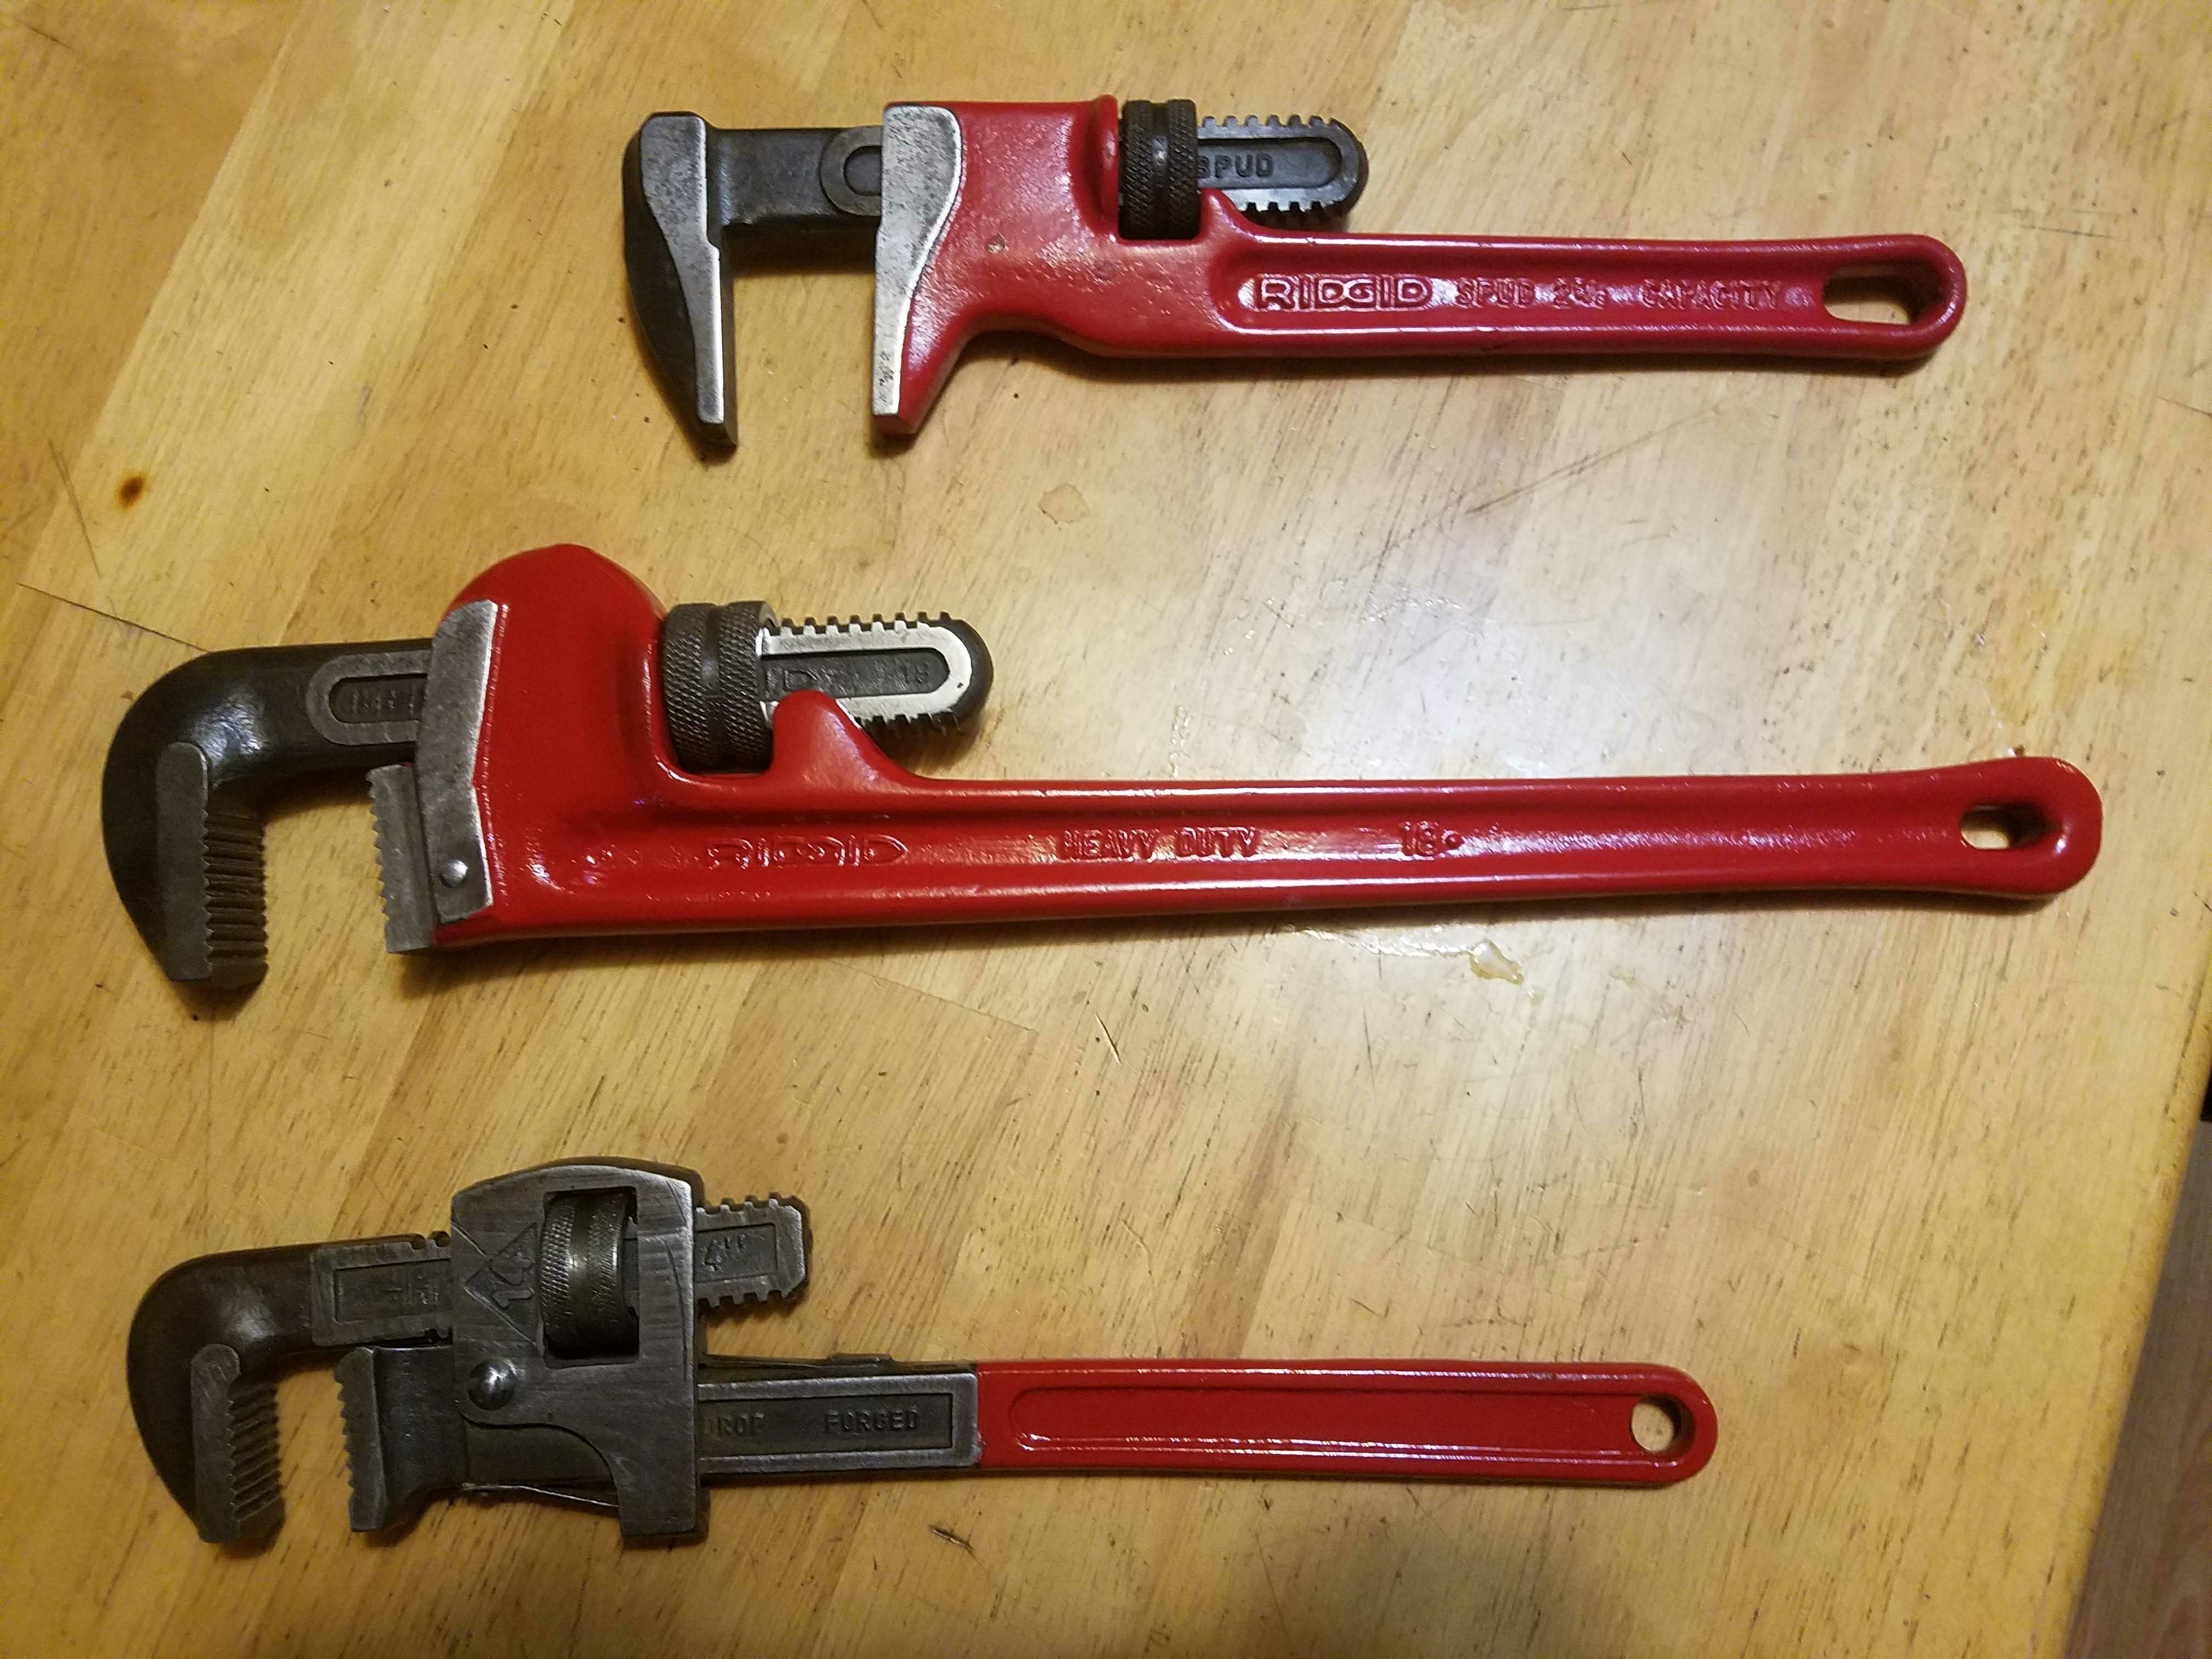 Cleaning up old Pipe wrenches - The Garage Journal Board